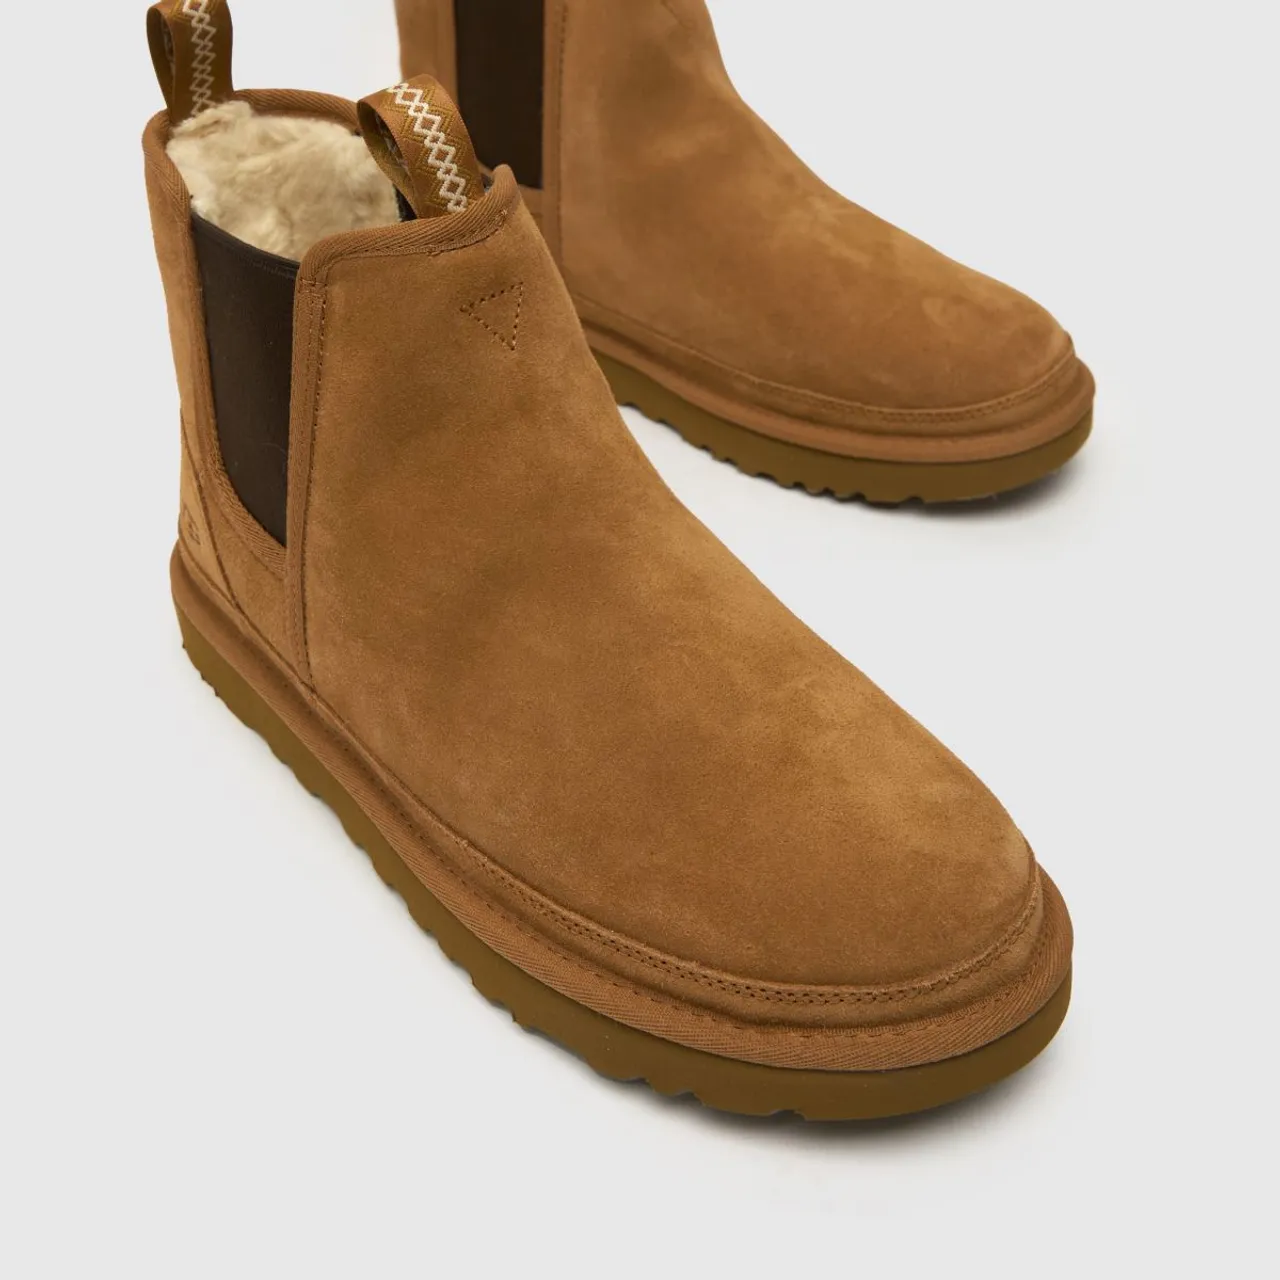 Ugg Neumel Chelsea Boots In Tan